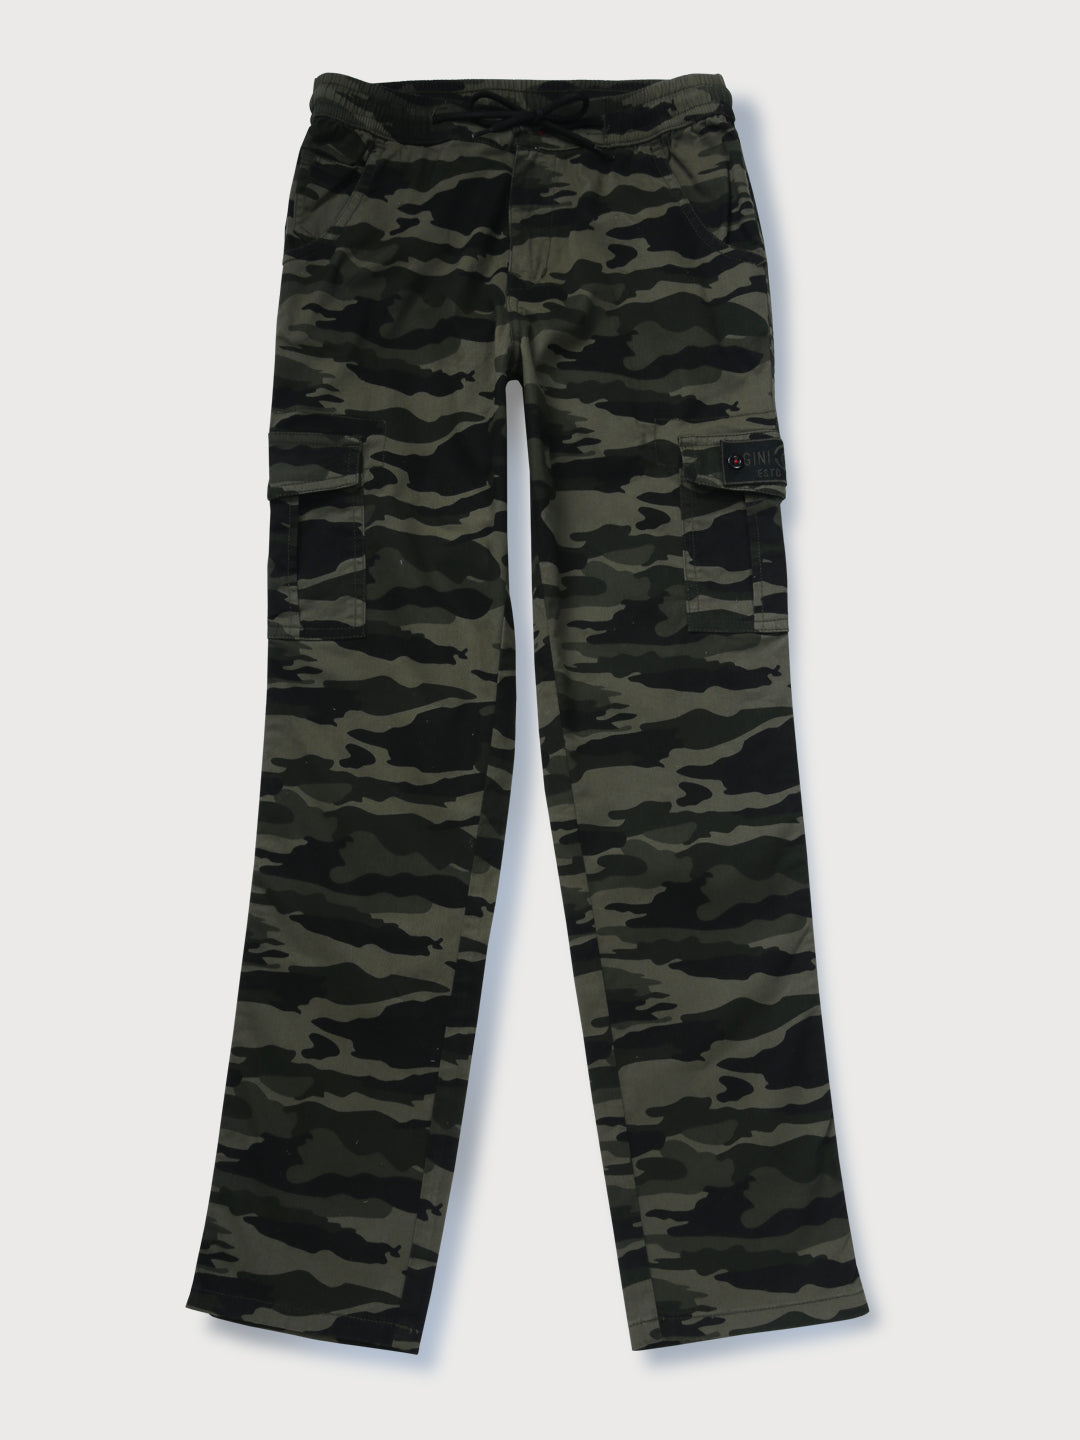 Boys Green Cotton Camouflage Elasticated Trouser